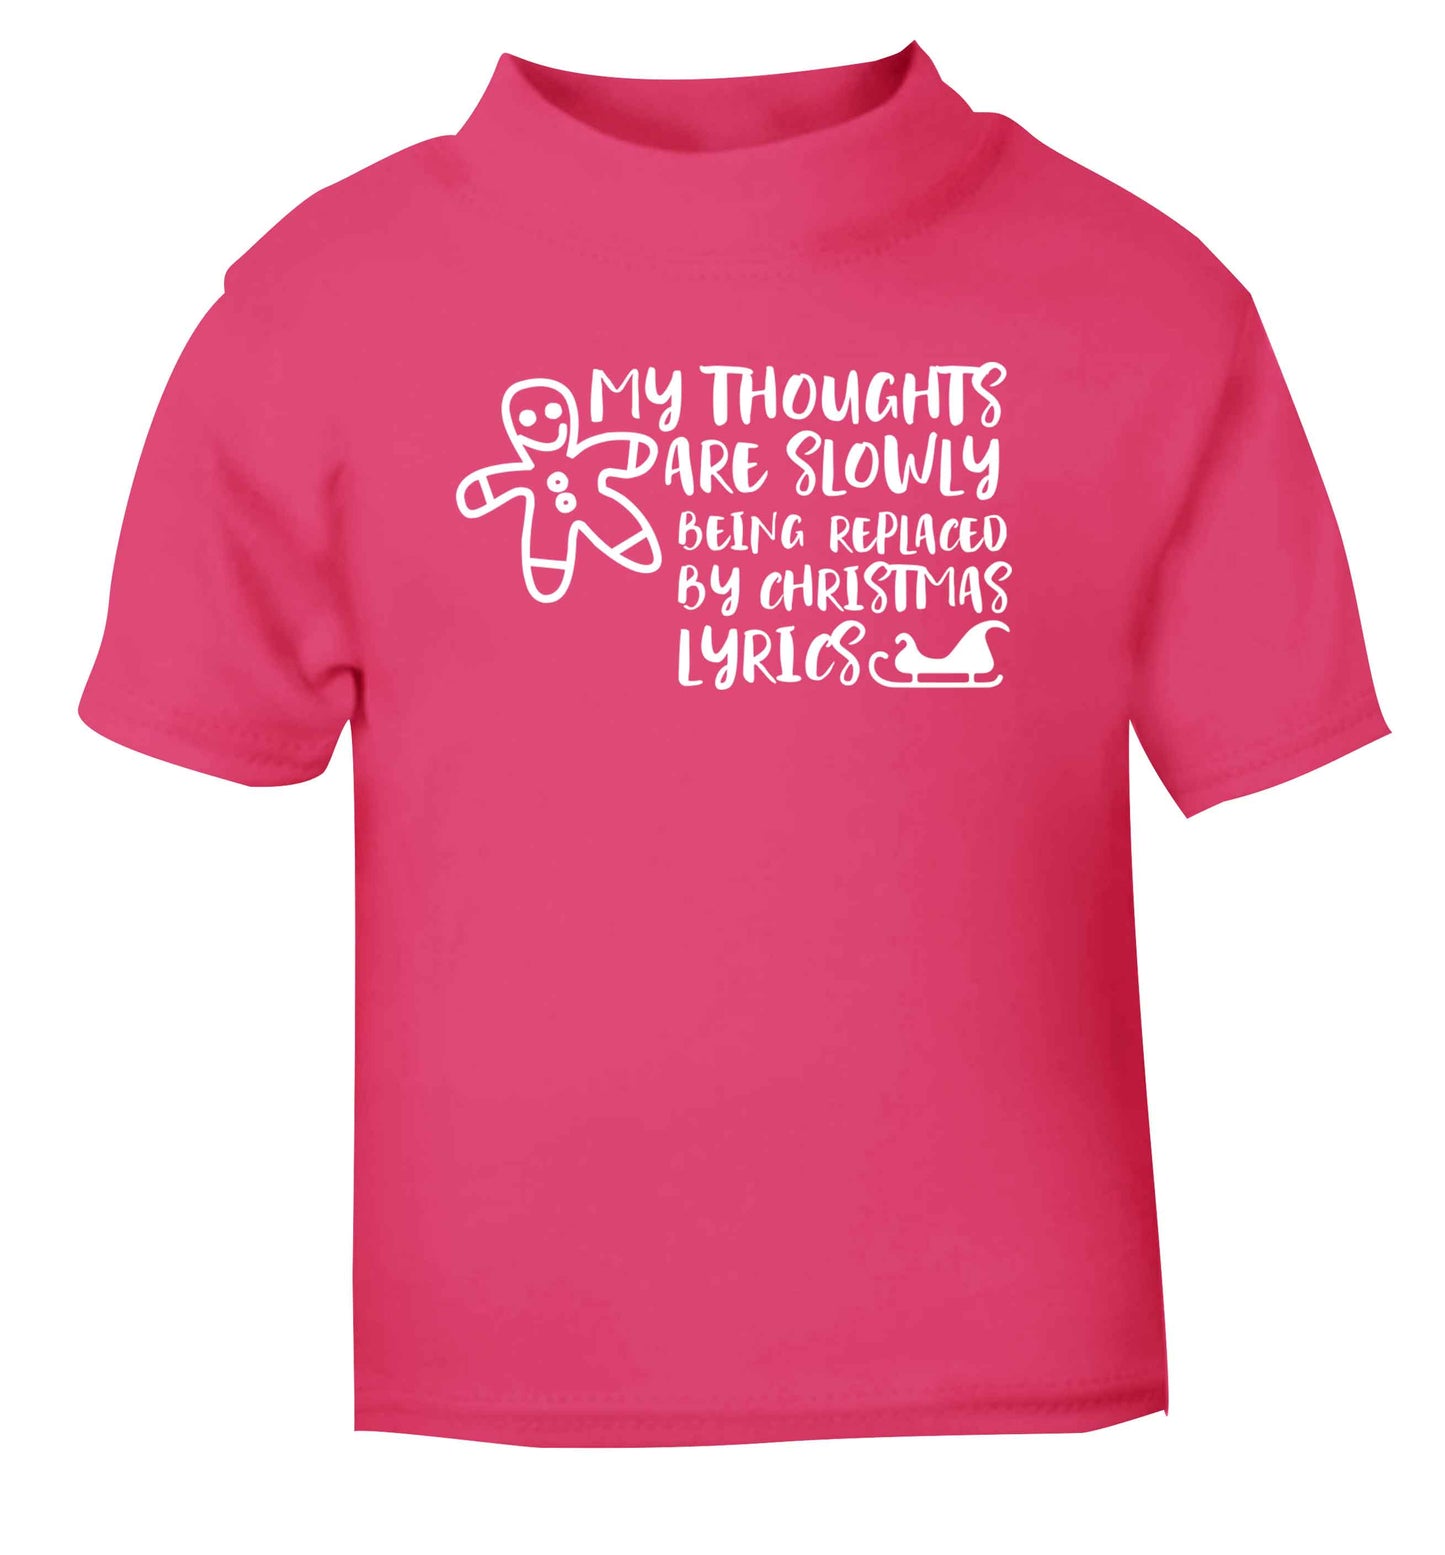 My thoughts are slowly being replaced by Christmas lyrics pink Baby Toddler Tshirt 2 Years